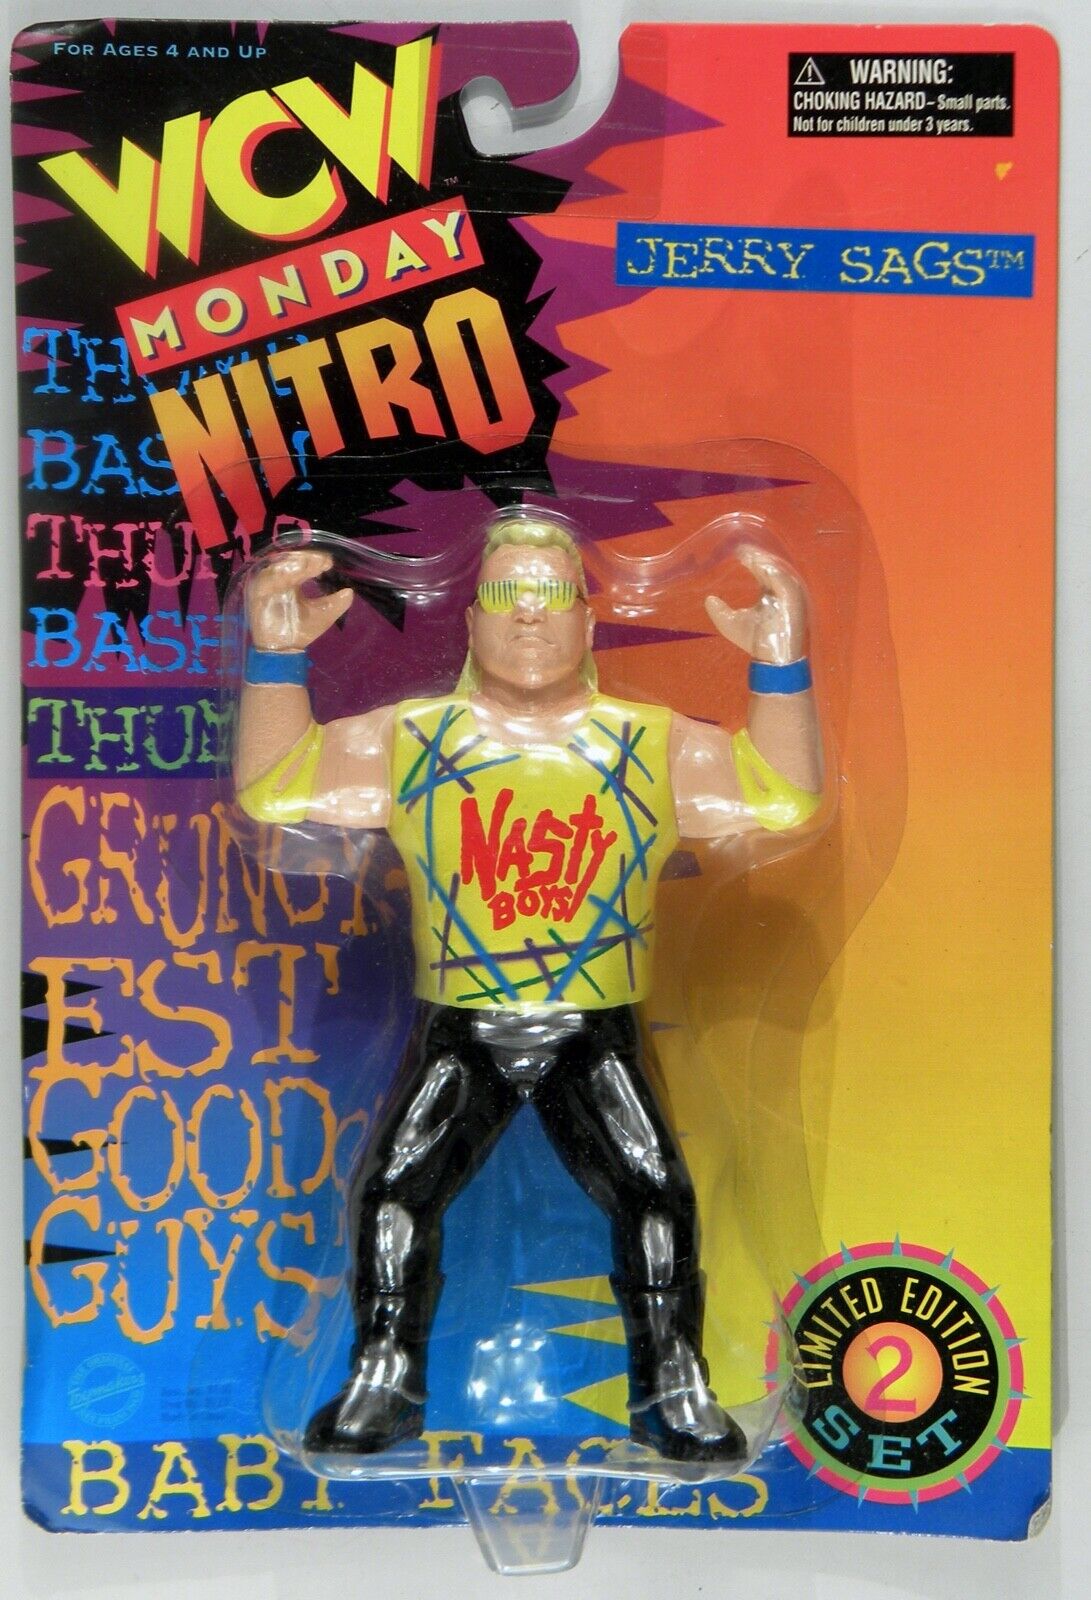 1997 WCW OSFTM Collectible Wrestlers [LJN Style] Limited Edition Set 2 "Baby Faces" Brian Knobs